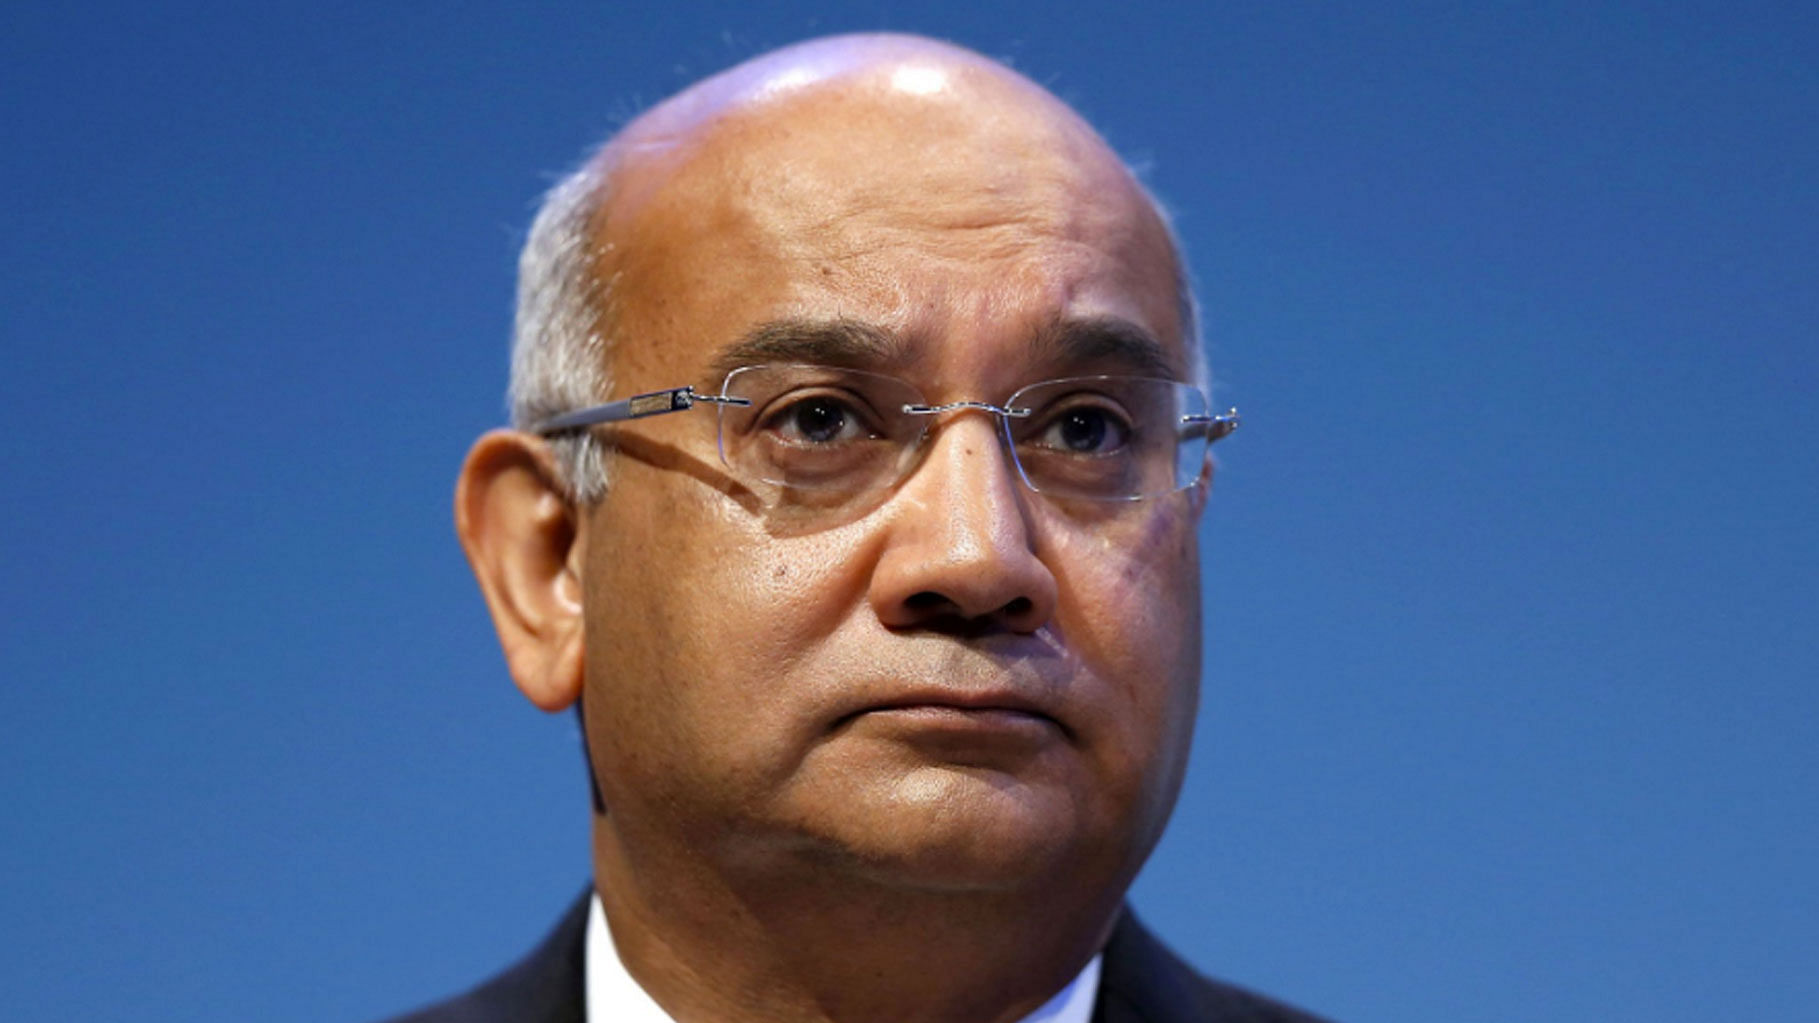 Keith Vaz was the chair of the influential House of Commons Affairs Committee. (Photo Courtesy: Twitter/<a href="https://twitter.com/DailyAgendaUK/status/772347362765336576">@DailyUkAgenda</a>)